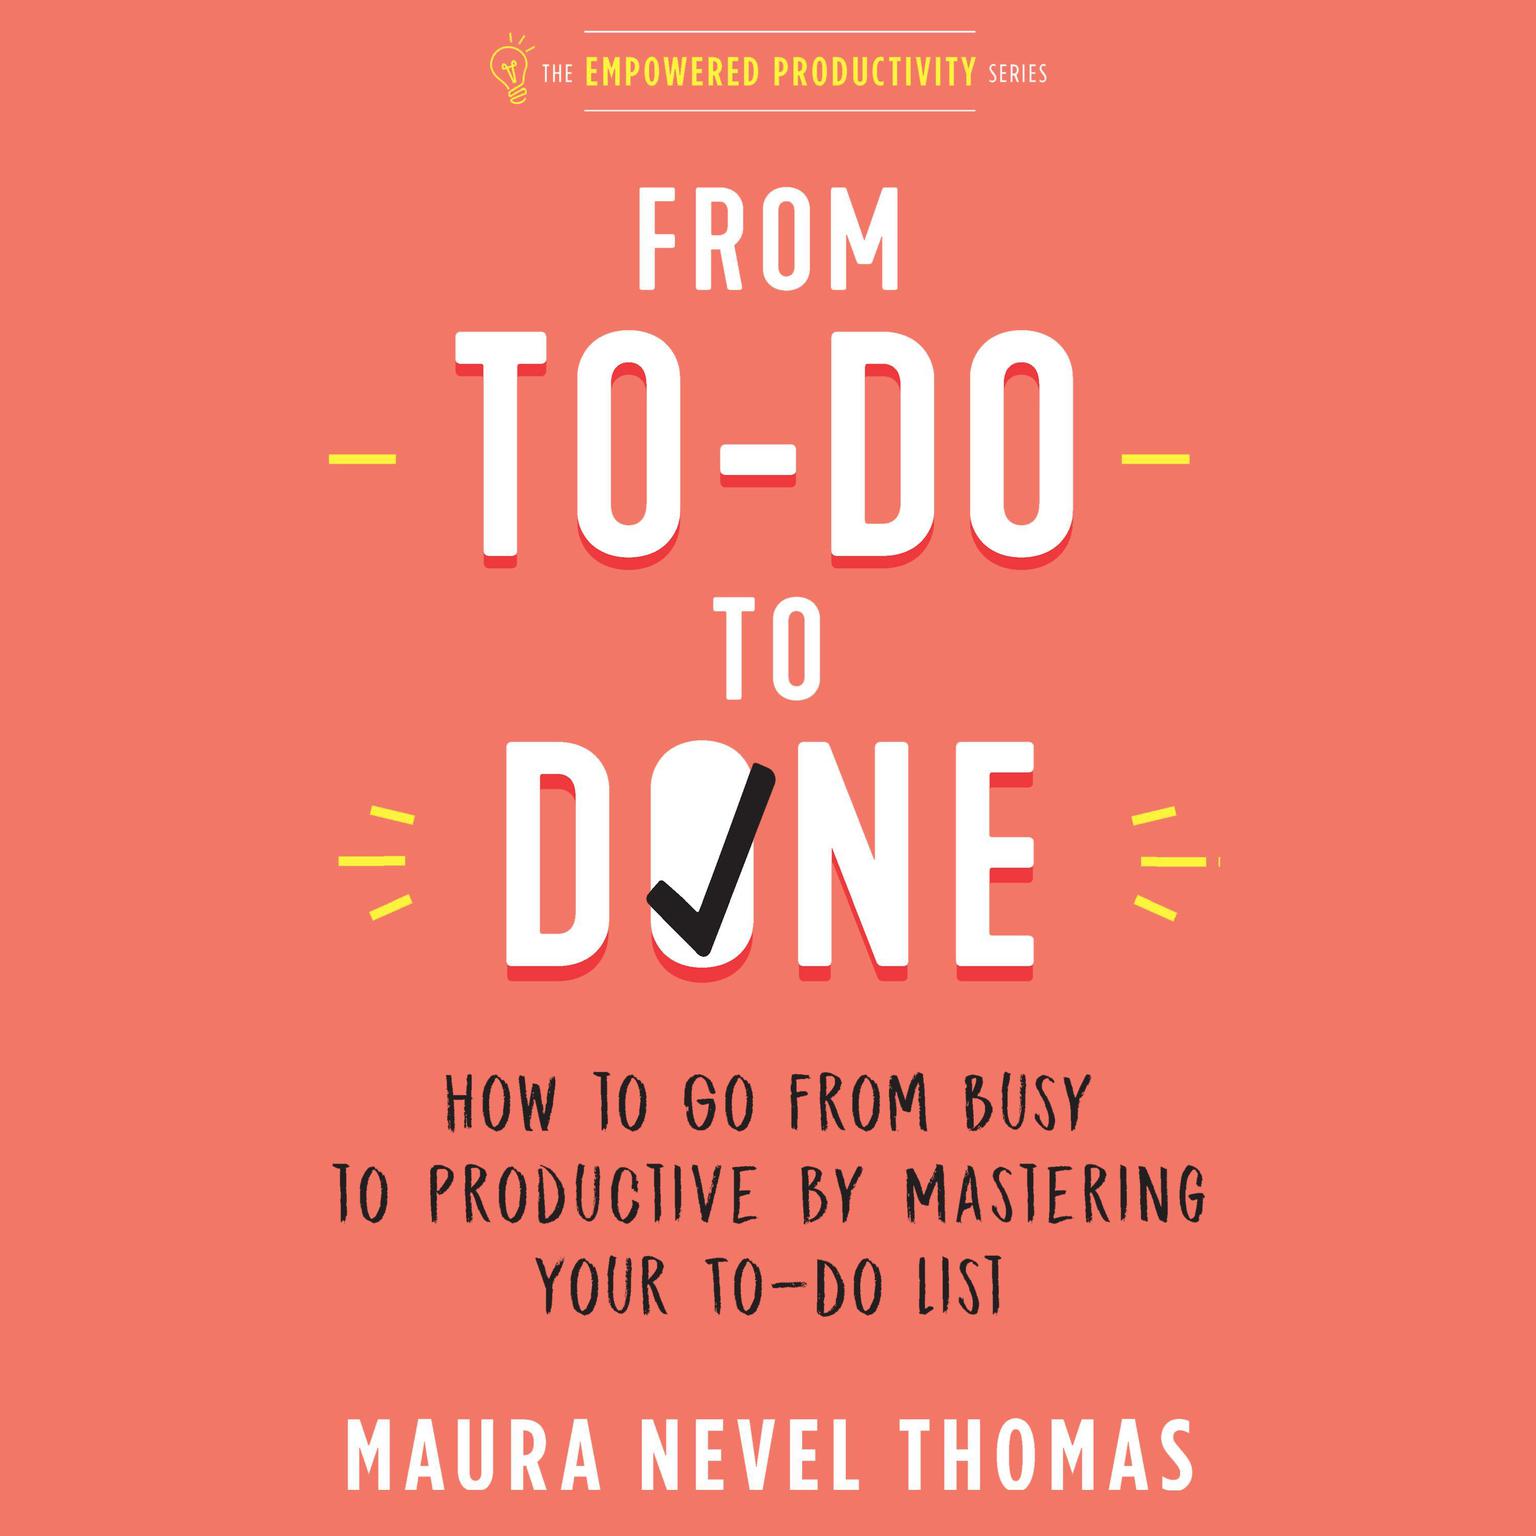 From To-Do to Done: How to Go from Busy to Productive by Mastering Your To-Do List Audiobook, by Maura Nevel Thomas